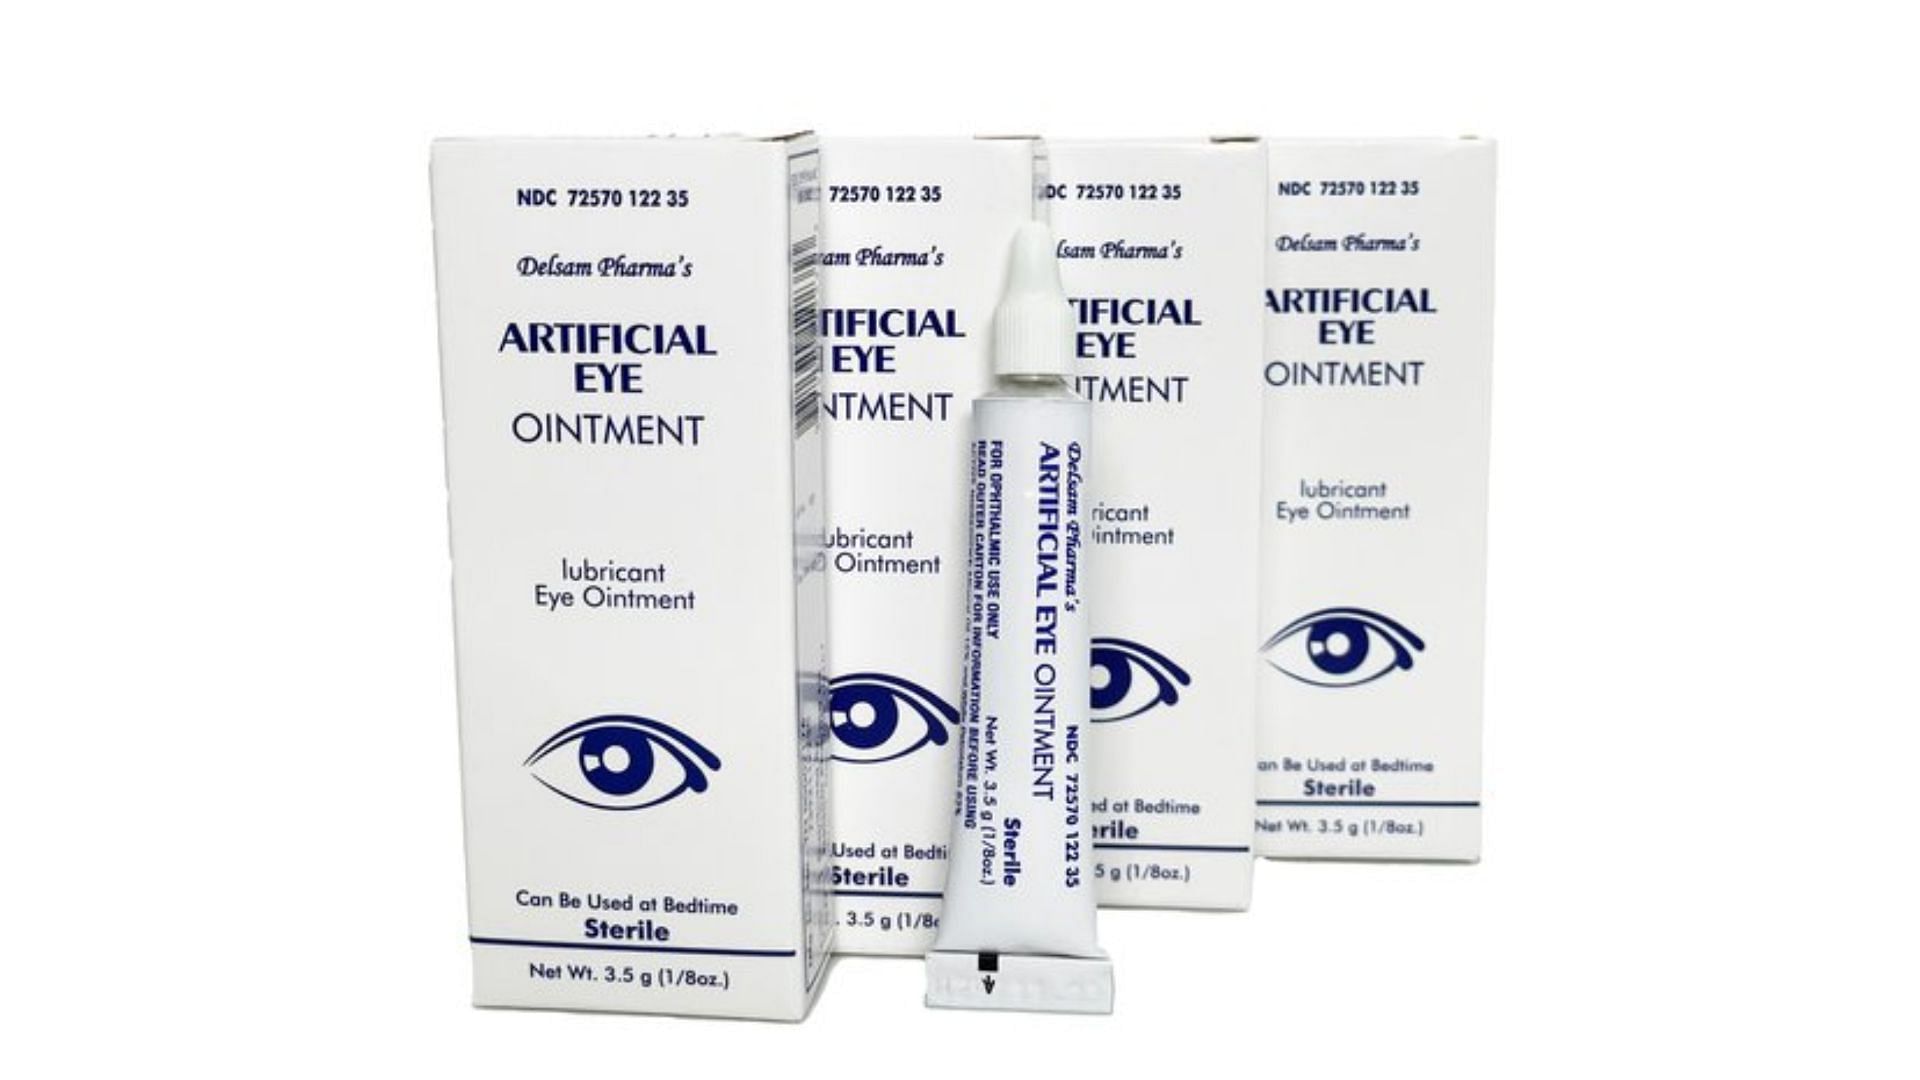 outer packaging of the Delsam Pharma&rsquo;s Artificial Eye Ointment recalled by FDA (Image via Delsam Pharma/FDA)